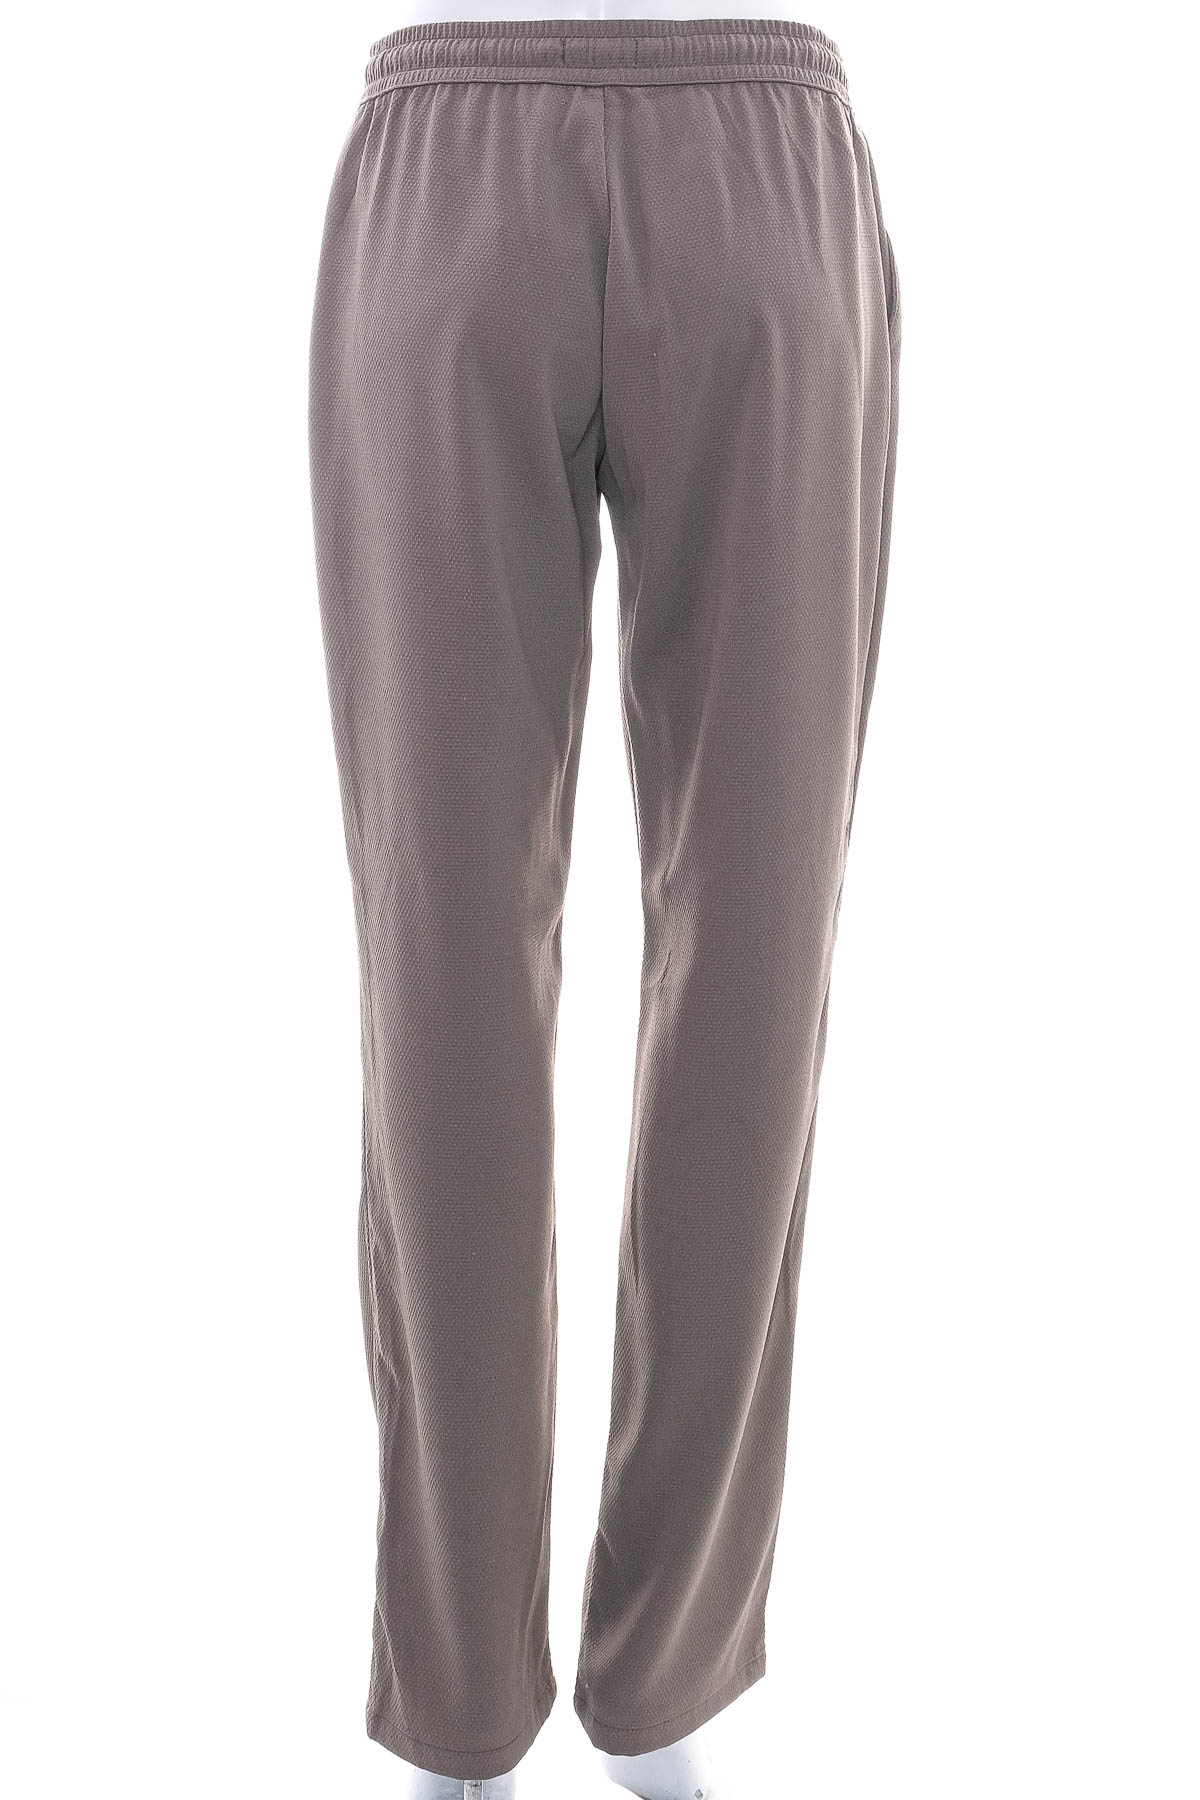 Women's trousers - Charles Vogele - 1